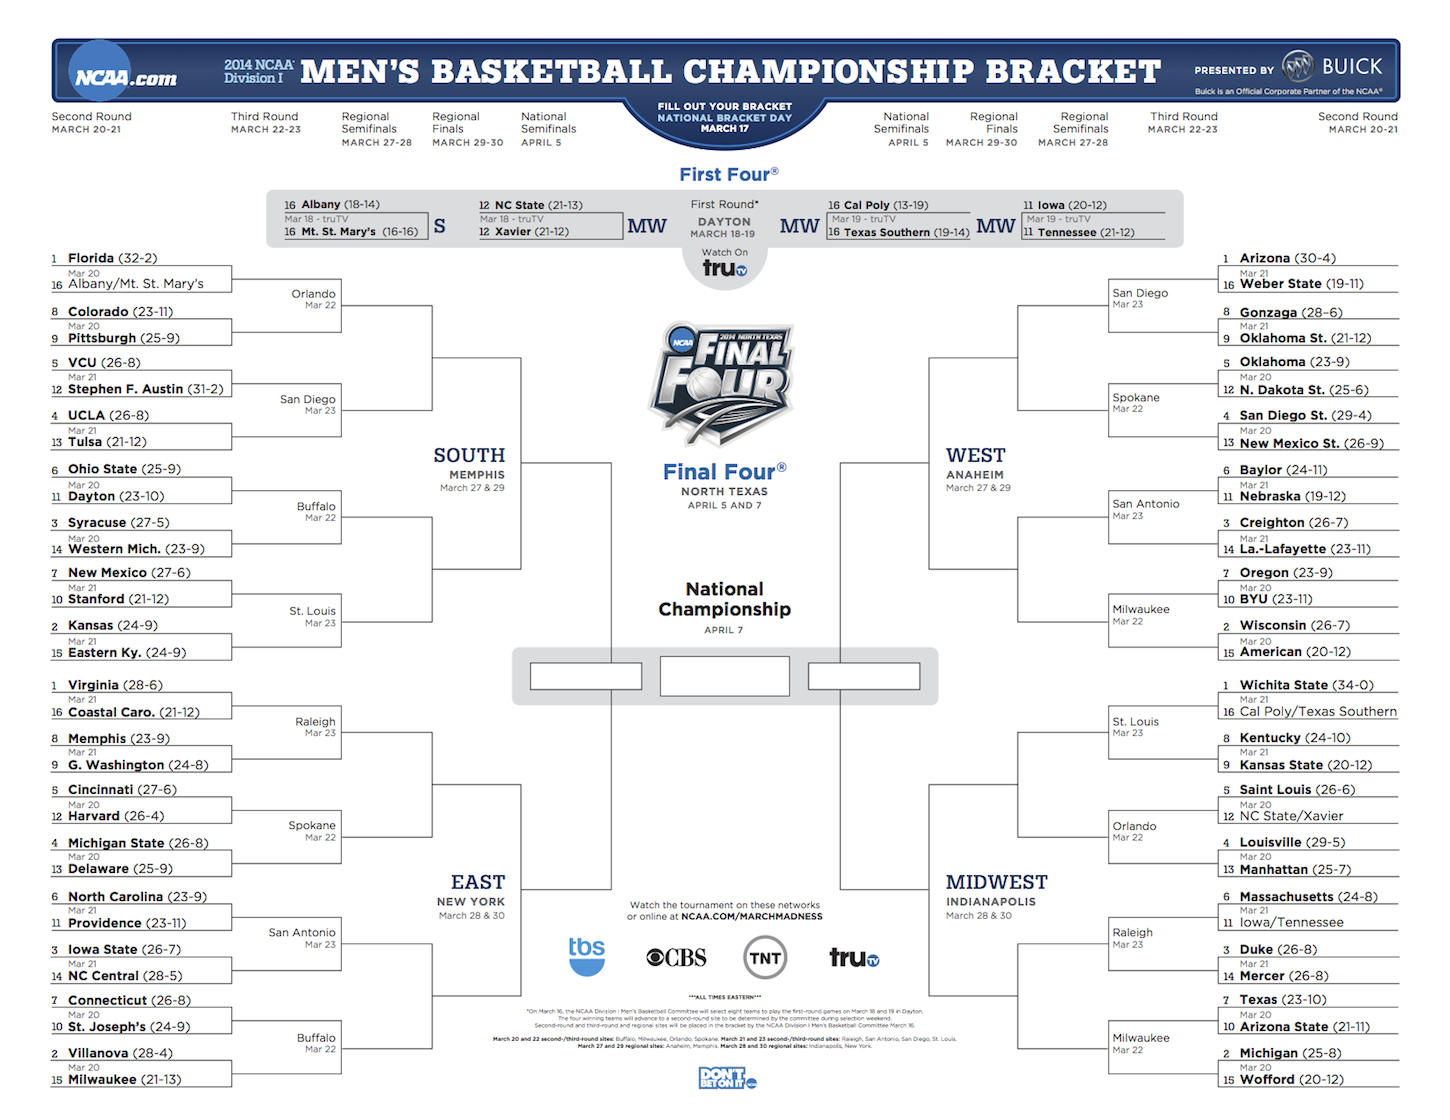 The Perfect NCAA Tournament Bracket - What'll You Do with your Billion